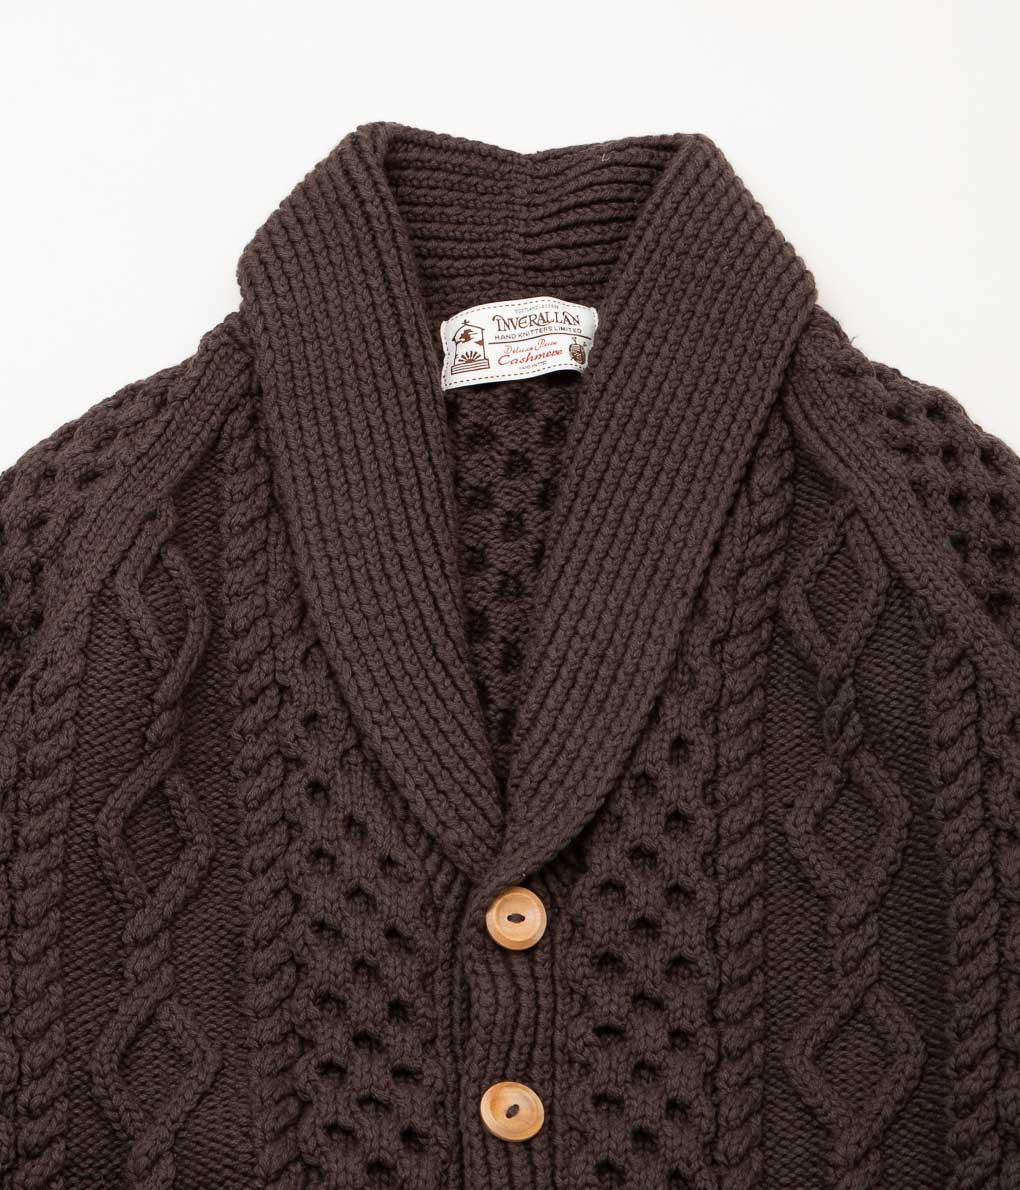 INVERALLAN "6A LONG SHAWL CARDIGAN (CASHMERE)" (SCOUT)